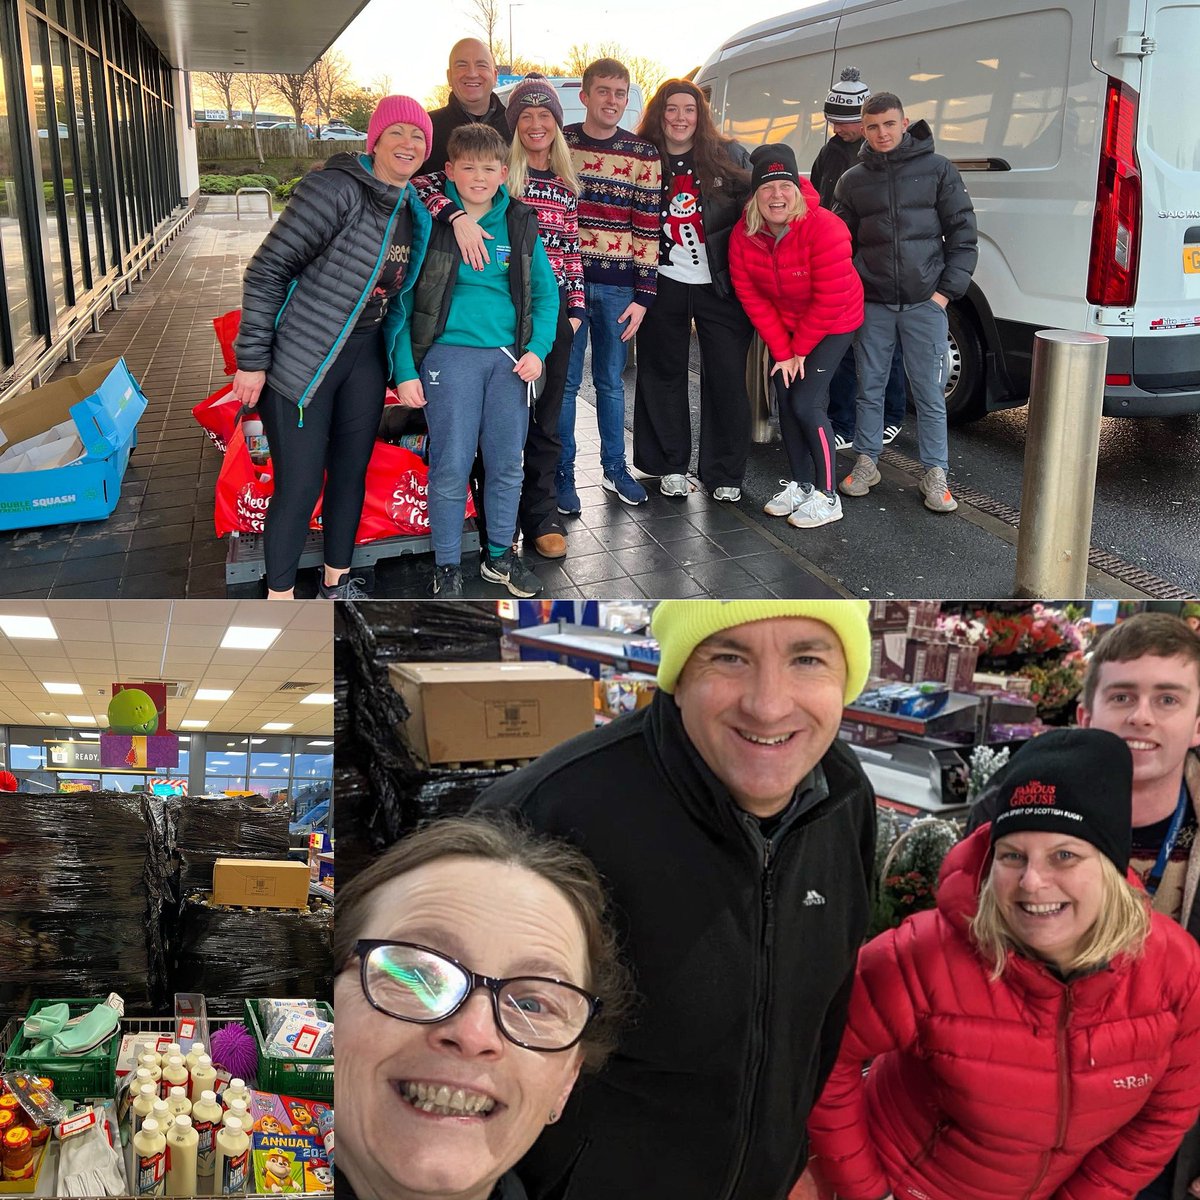 And so it’s started….yesterday we picked up 6 pallets of food with Connected Communities PSG and Fa’side. This will be processed ready to distribute to over 430 families in East Lothian next week!

#FestiveProvision #HealthyHappyCommunities